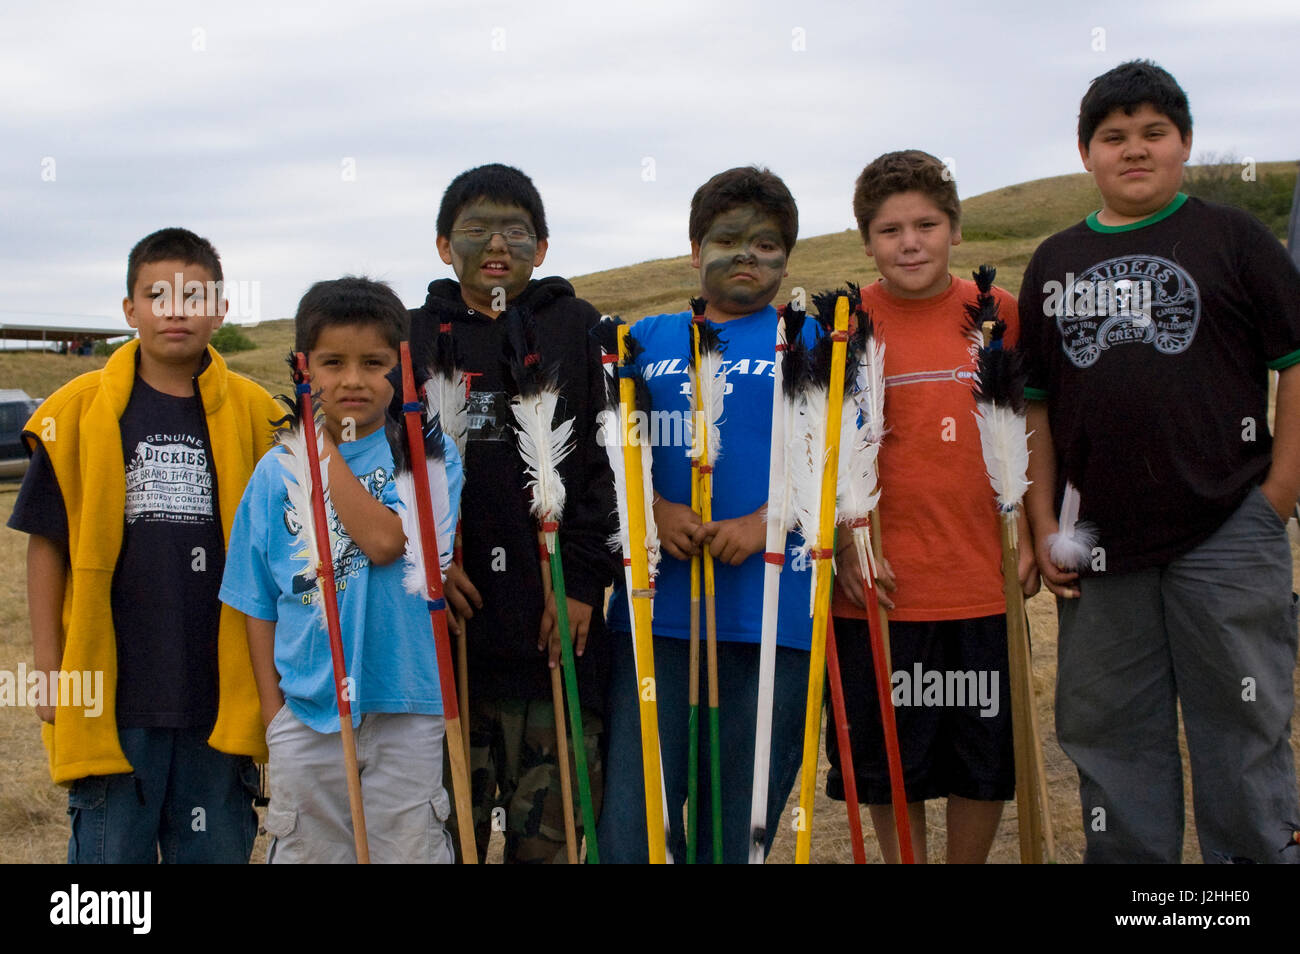 Group of young children members of the Three Affiliated tribes (Mandan, Arikara and Hidatsa) today continue to play many of the traditional games of their ancestors such as the arrow toss game on the Fort Berthold Indian Reservation, North Dakota Stock Photo